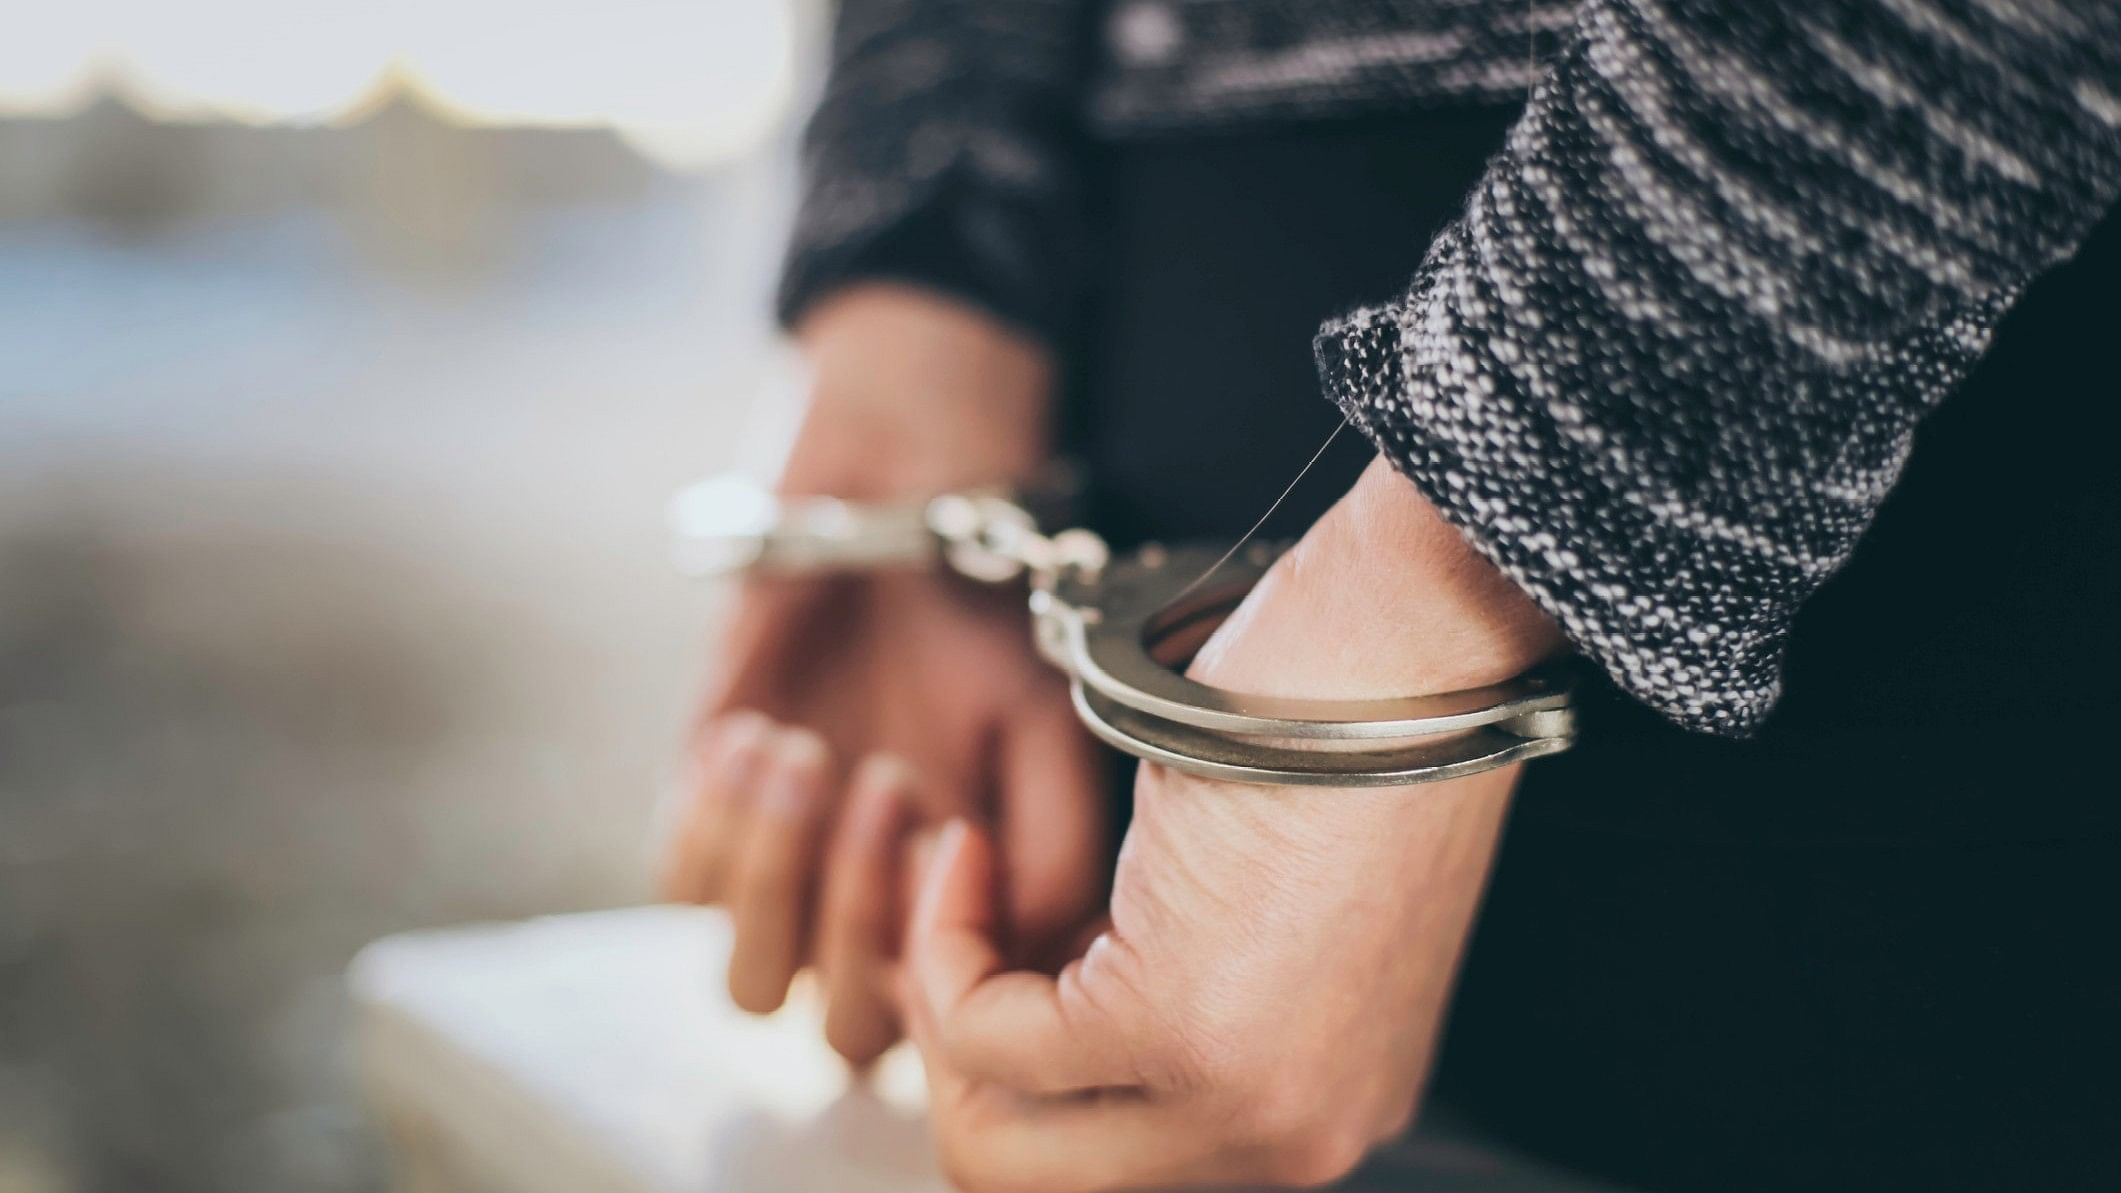 <div class="paragraphs"><p>The accused woman was produced in the Raigad district court on Wednesday which remanded her in police custody for seven days. (Representative image)</p></div>